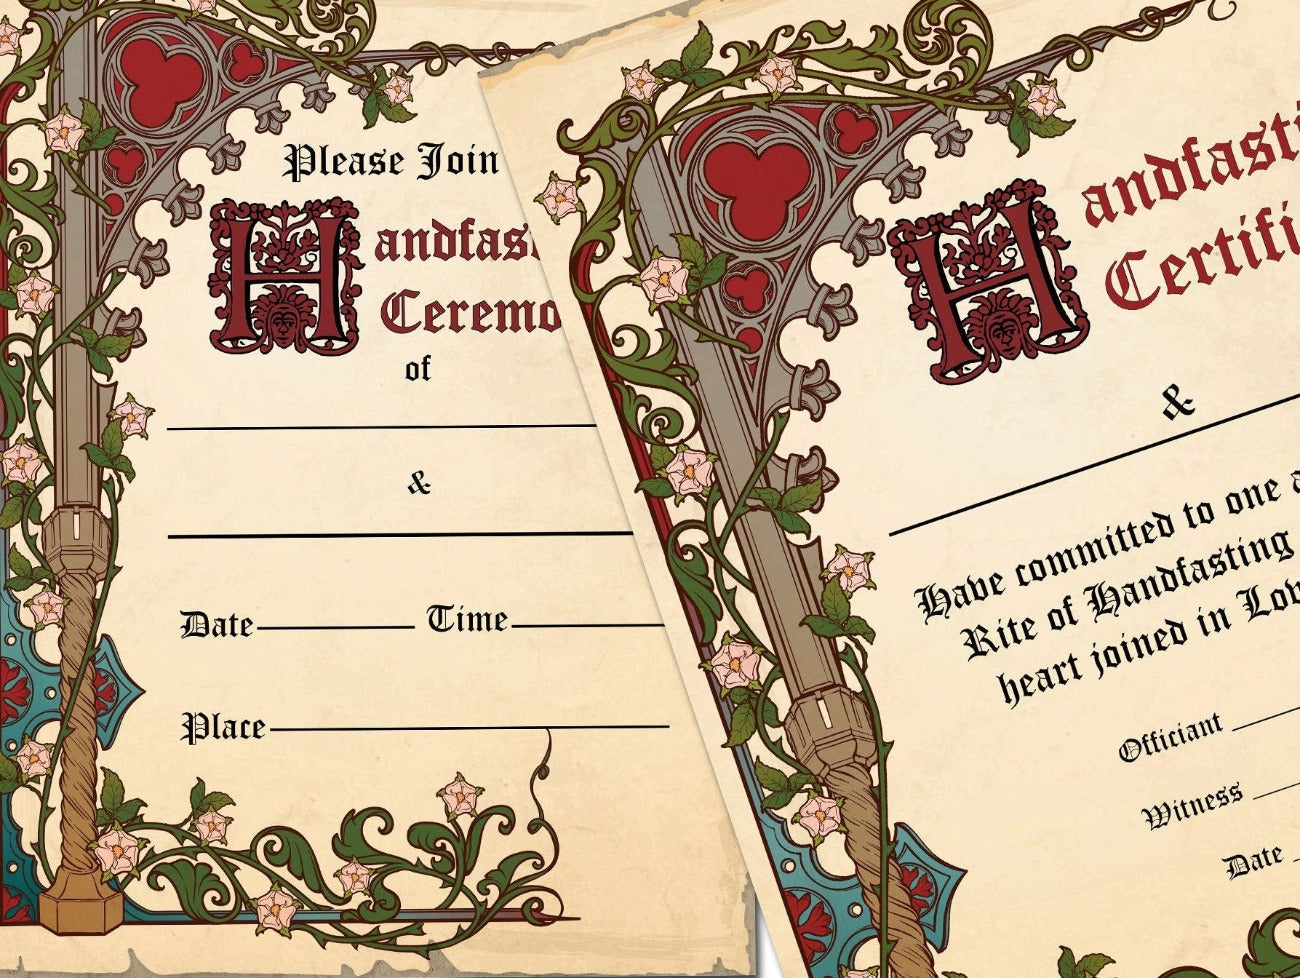 MEDIEVAL HANDFASTING, Printable Certificate & Invitation, Wicca Pagan Wedding Marriage Parchment, Jump the Broom, Witchcraft Cord Binding - Morgana Magick Spell